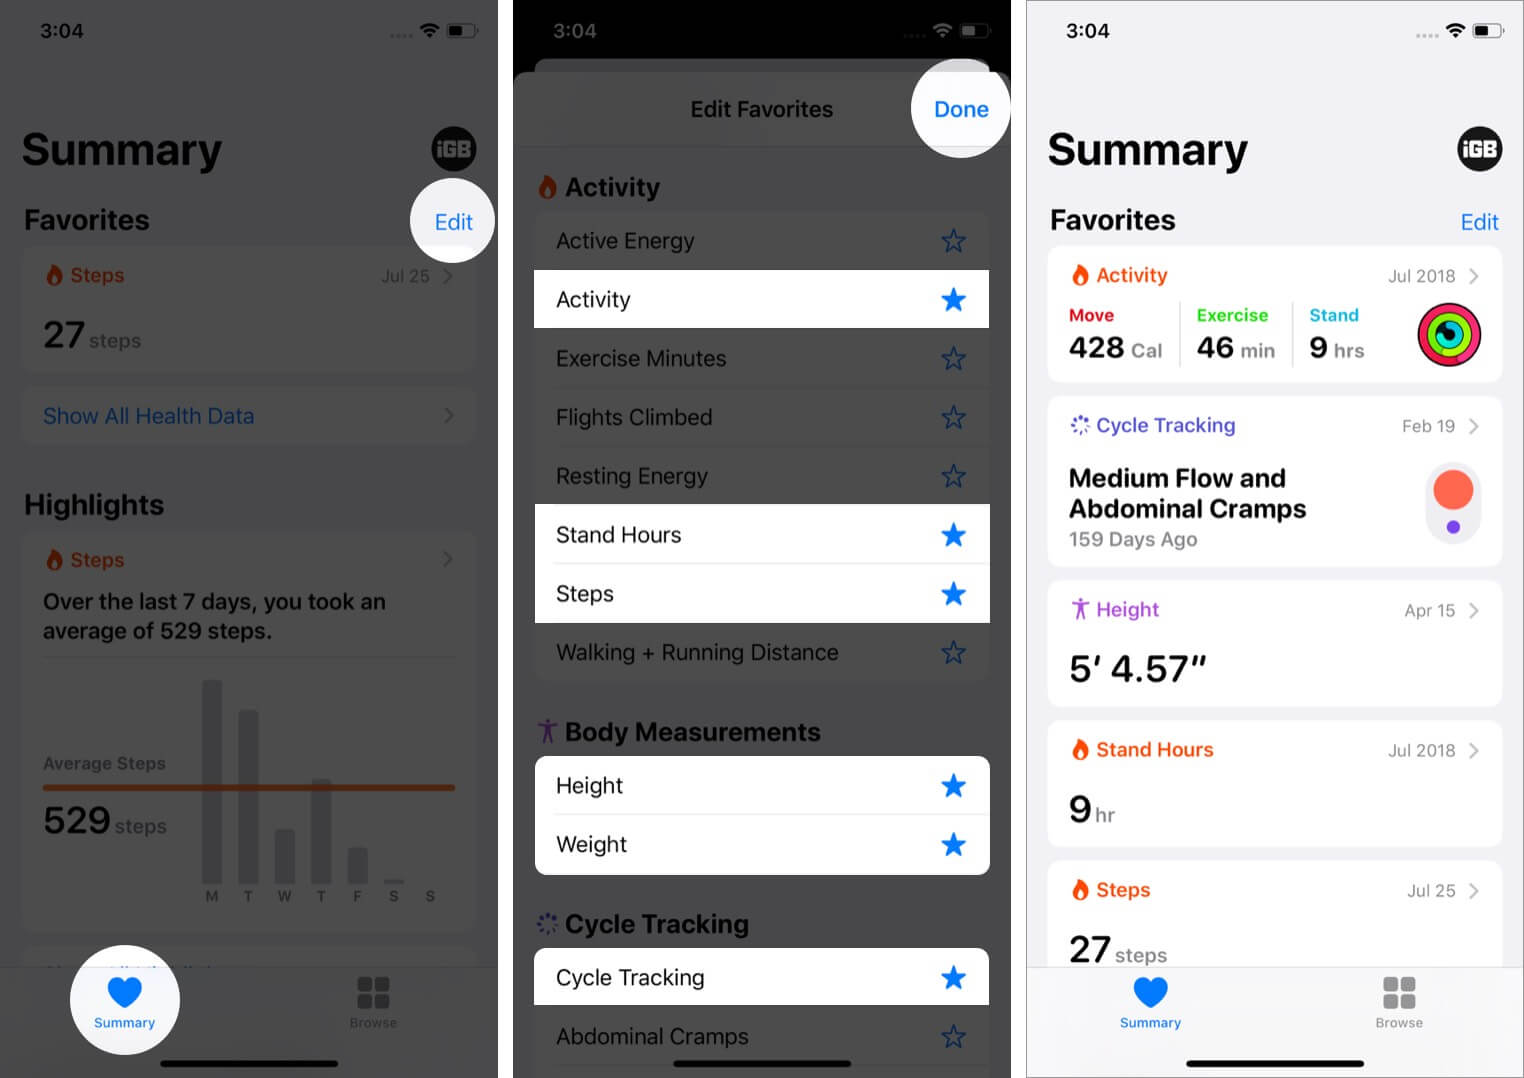 edit favorites to see relevant data at one place on iphone